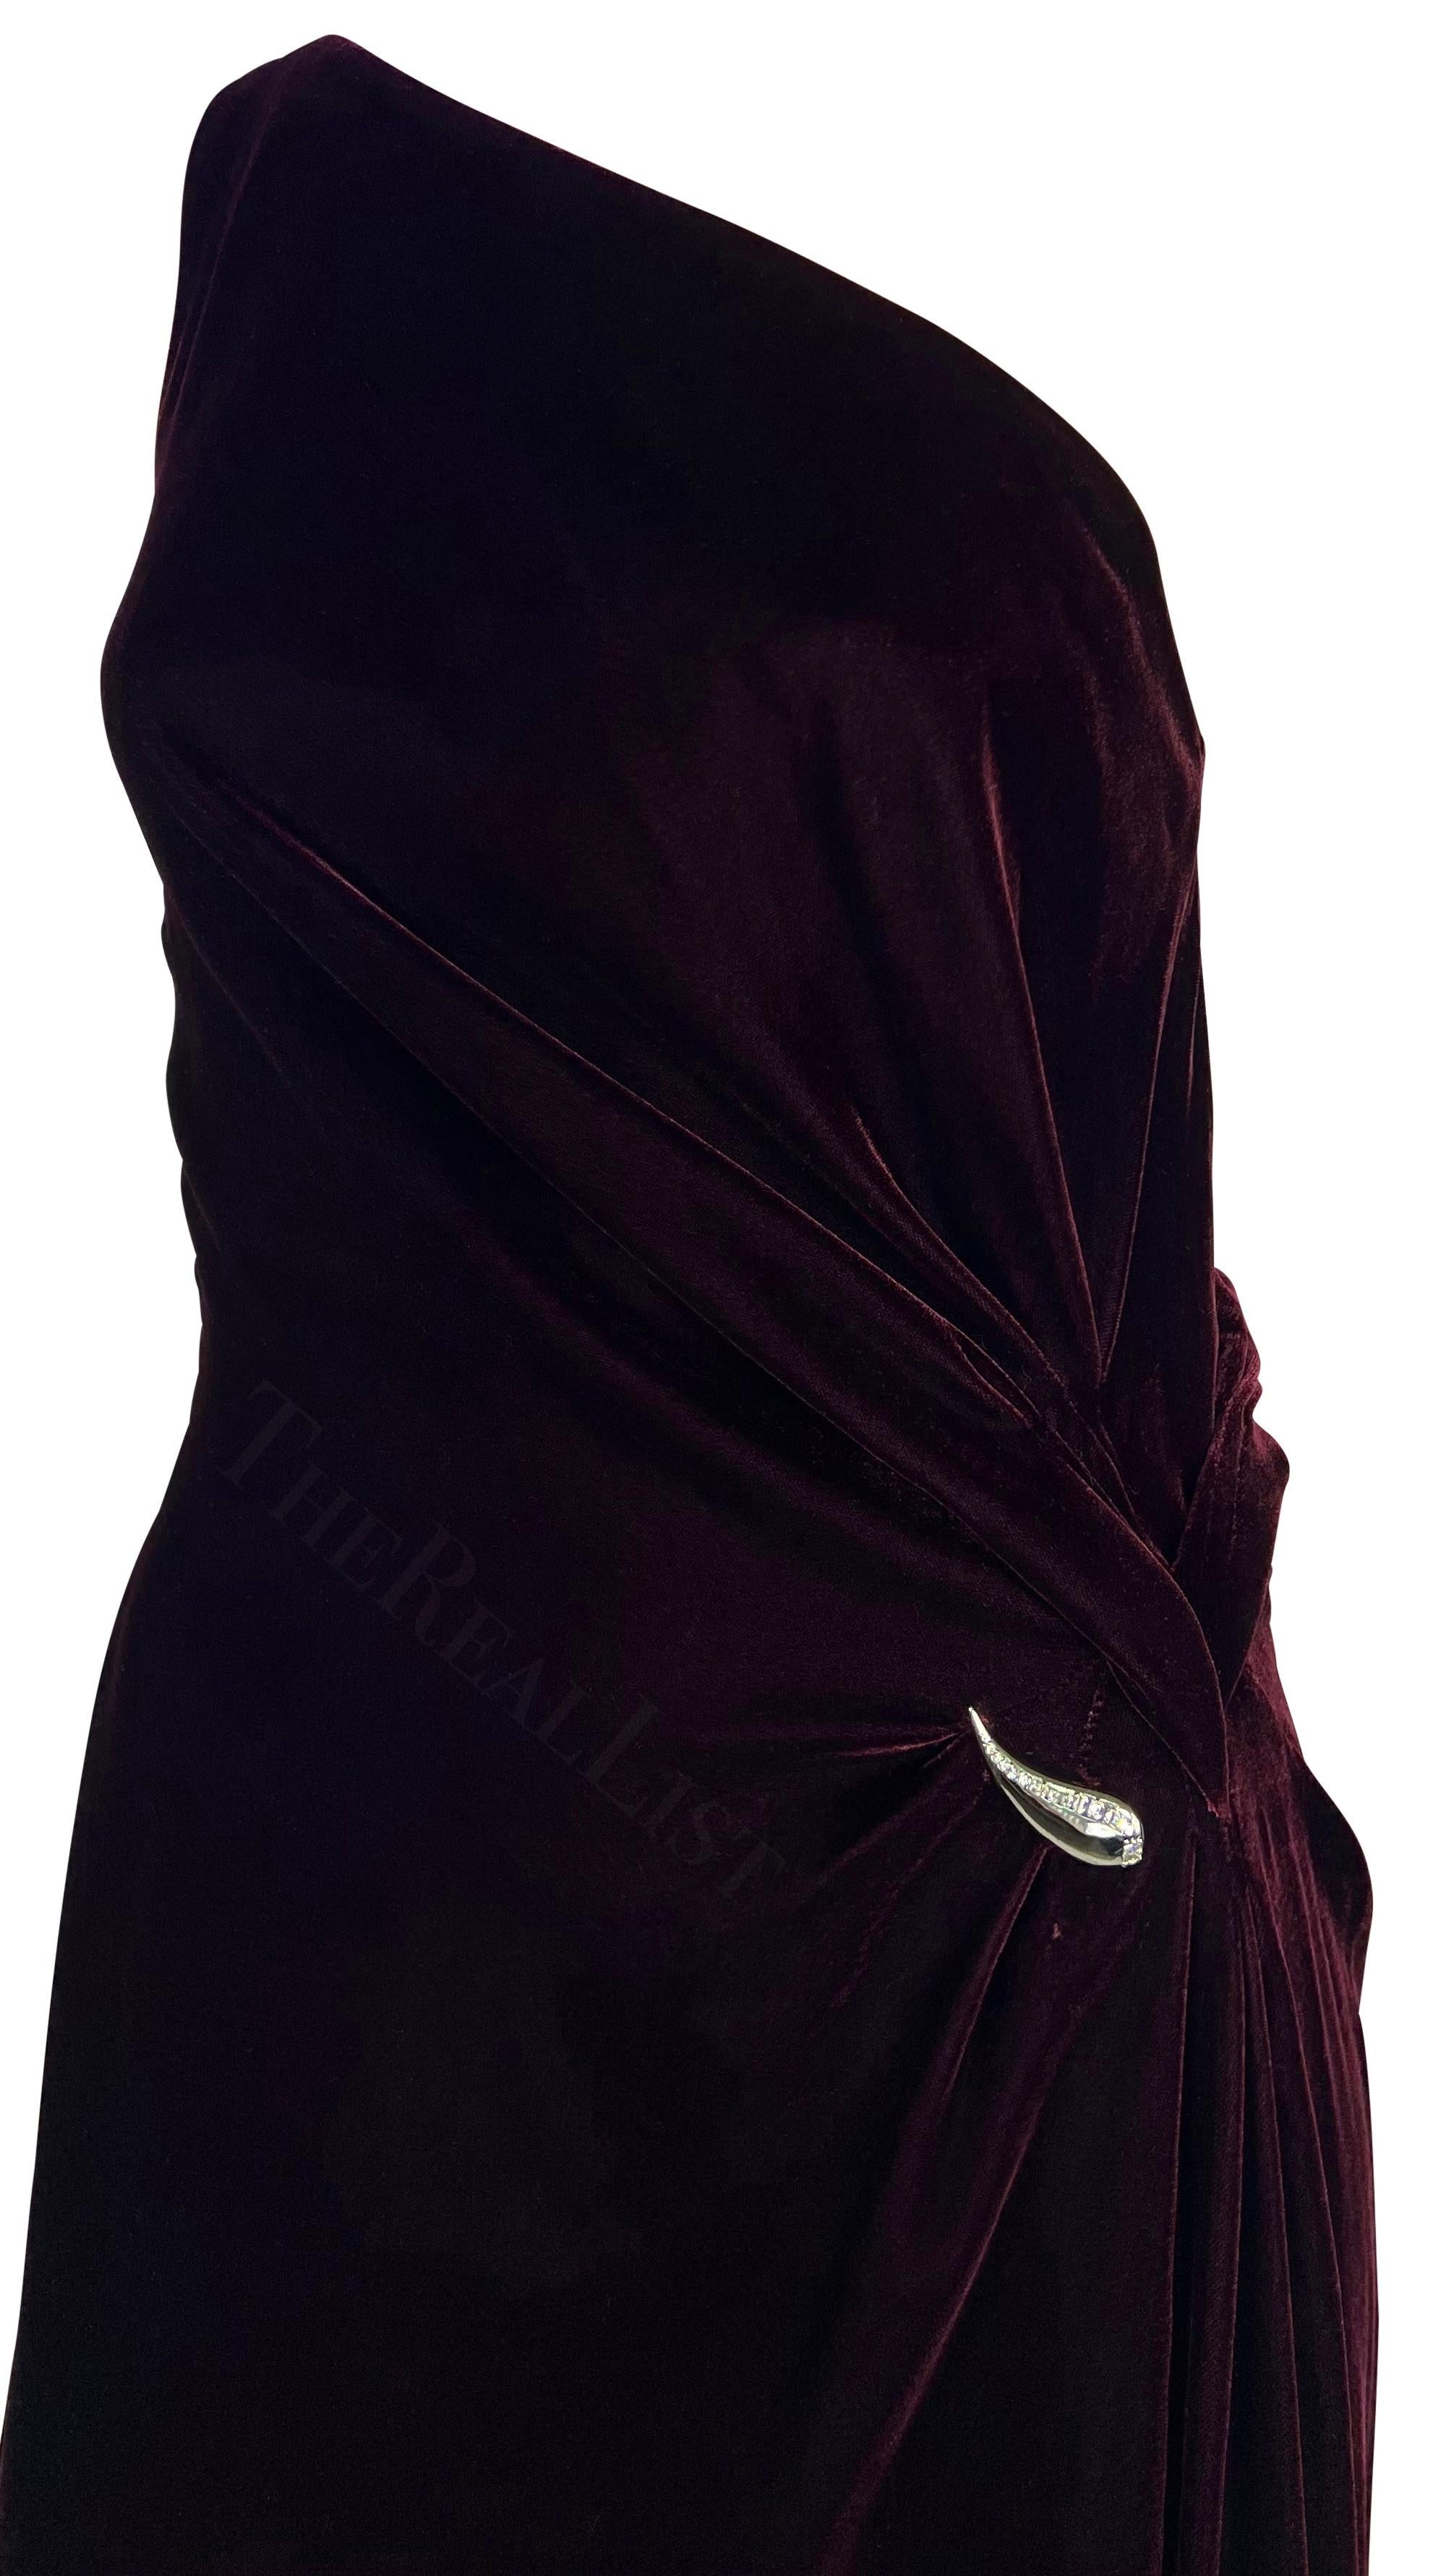 F/W 2000 Thierry Mugler Rhinestone Burgundy Velvet Single Shoulder Runway Gown In Excellent Condition For Sale In West Hollywood, CA